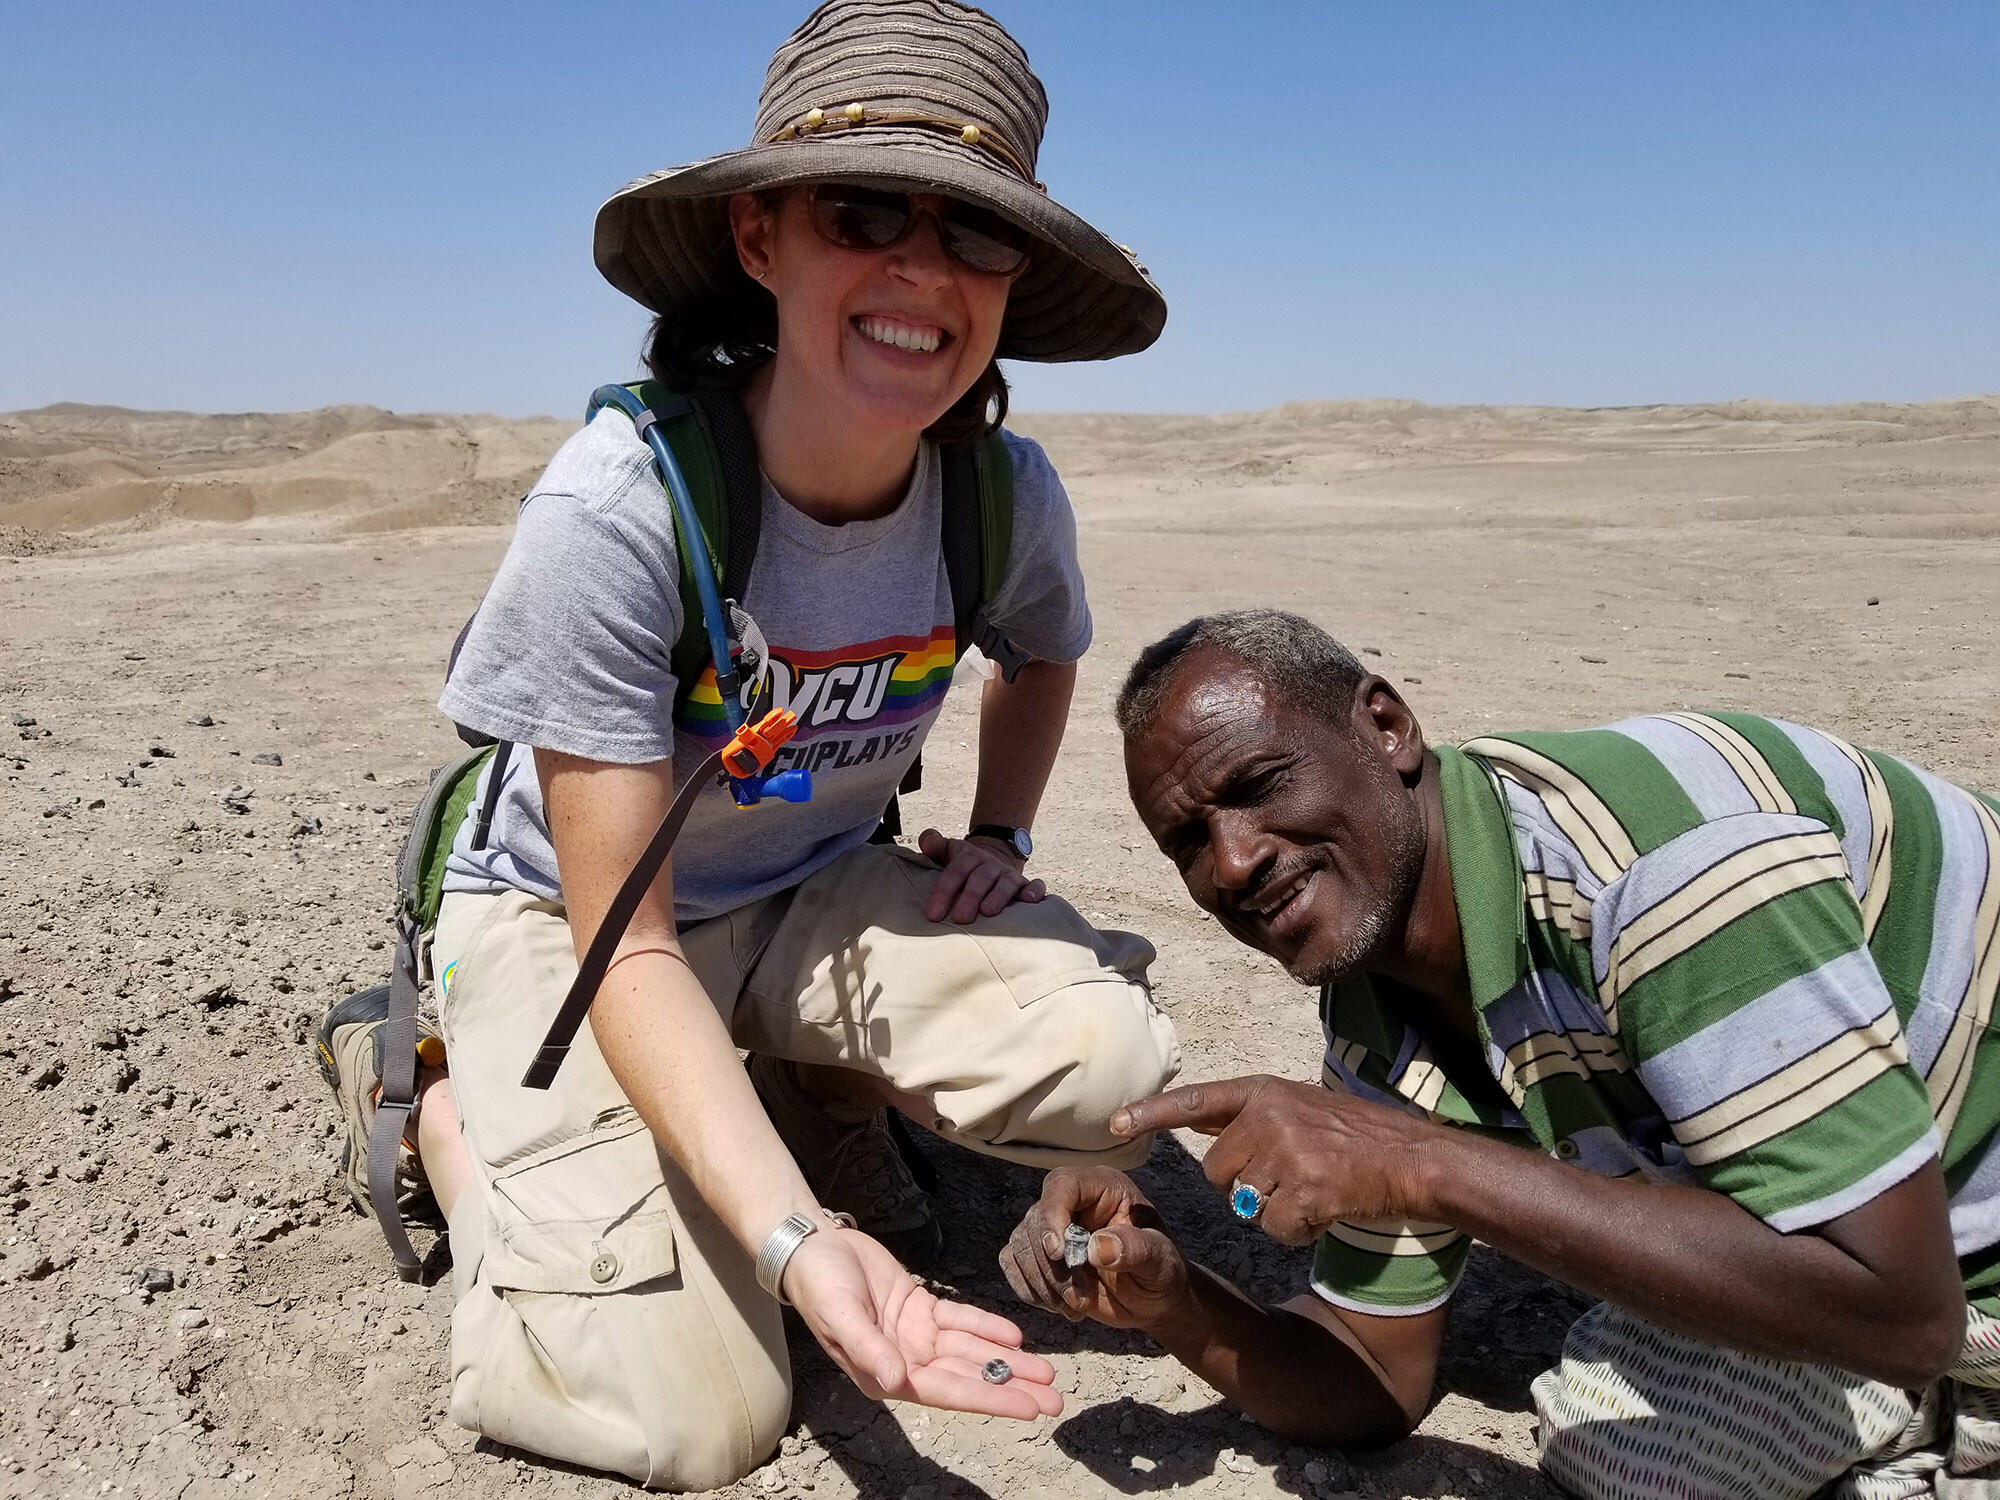 Amy Rector, Ph.D., and Omar Abdullah show off hominin teeth fossils that they found in the Afar region of Ethiopia.